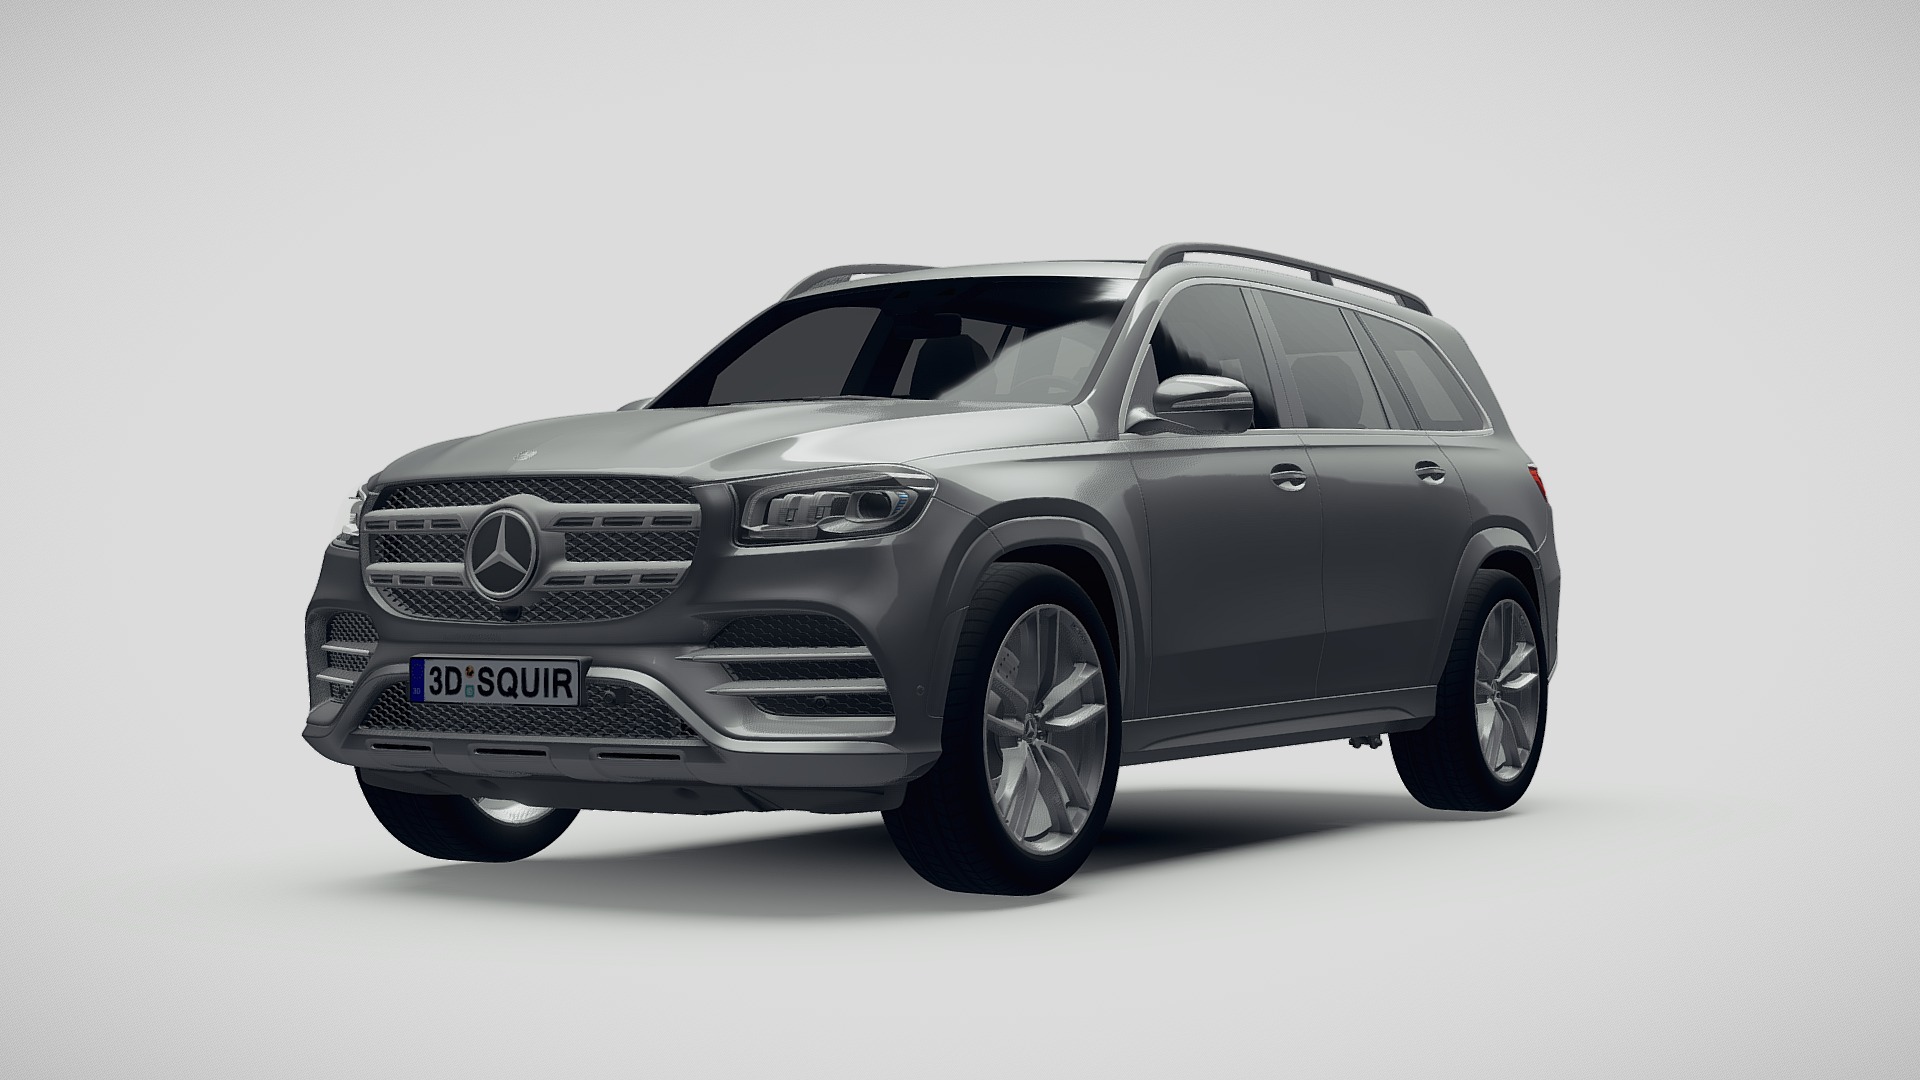 3D model Mercedes-Benz GLS 2020 - This is a 3D model of the Mercedes-Benz GLS 2020. The 3D model is about a car parked with its front facing the camera.